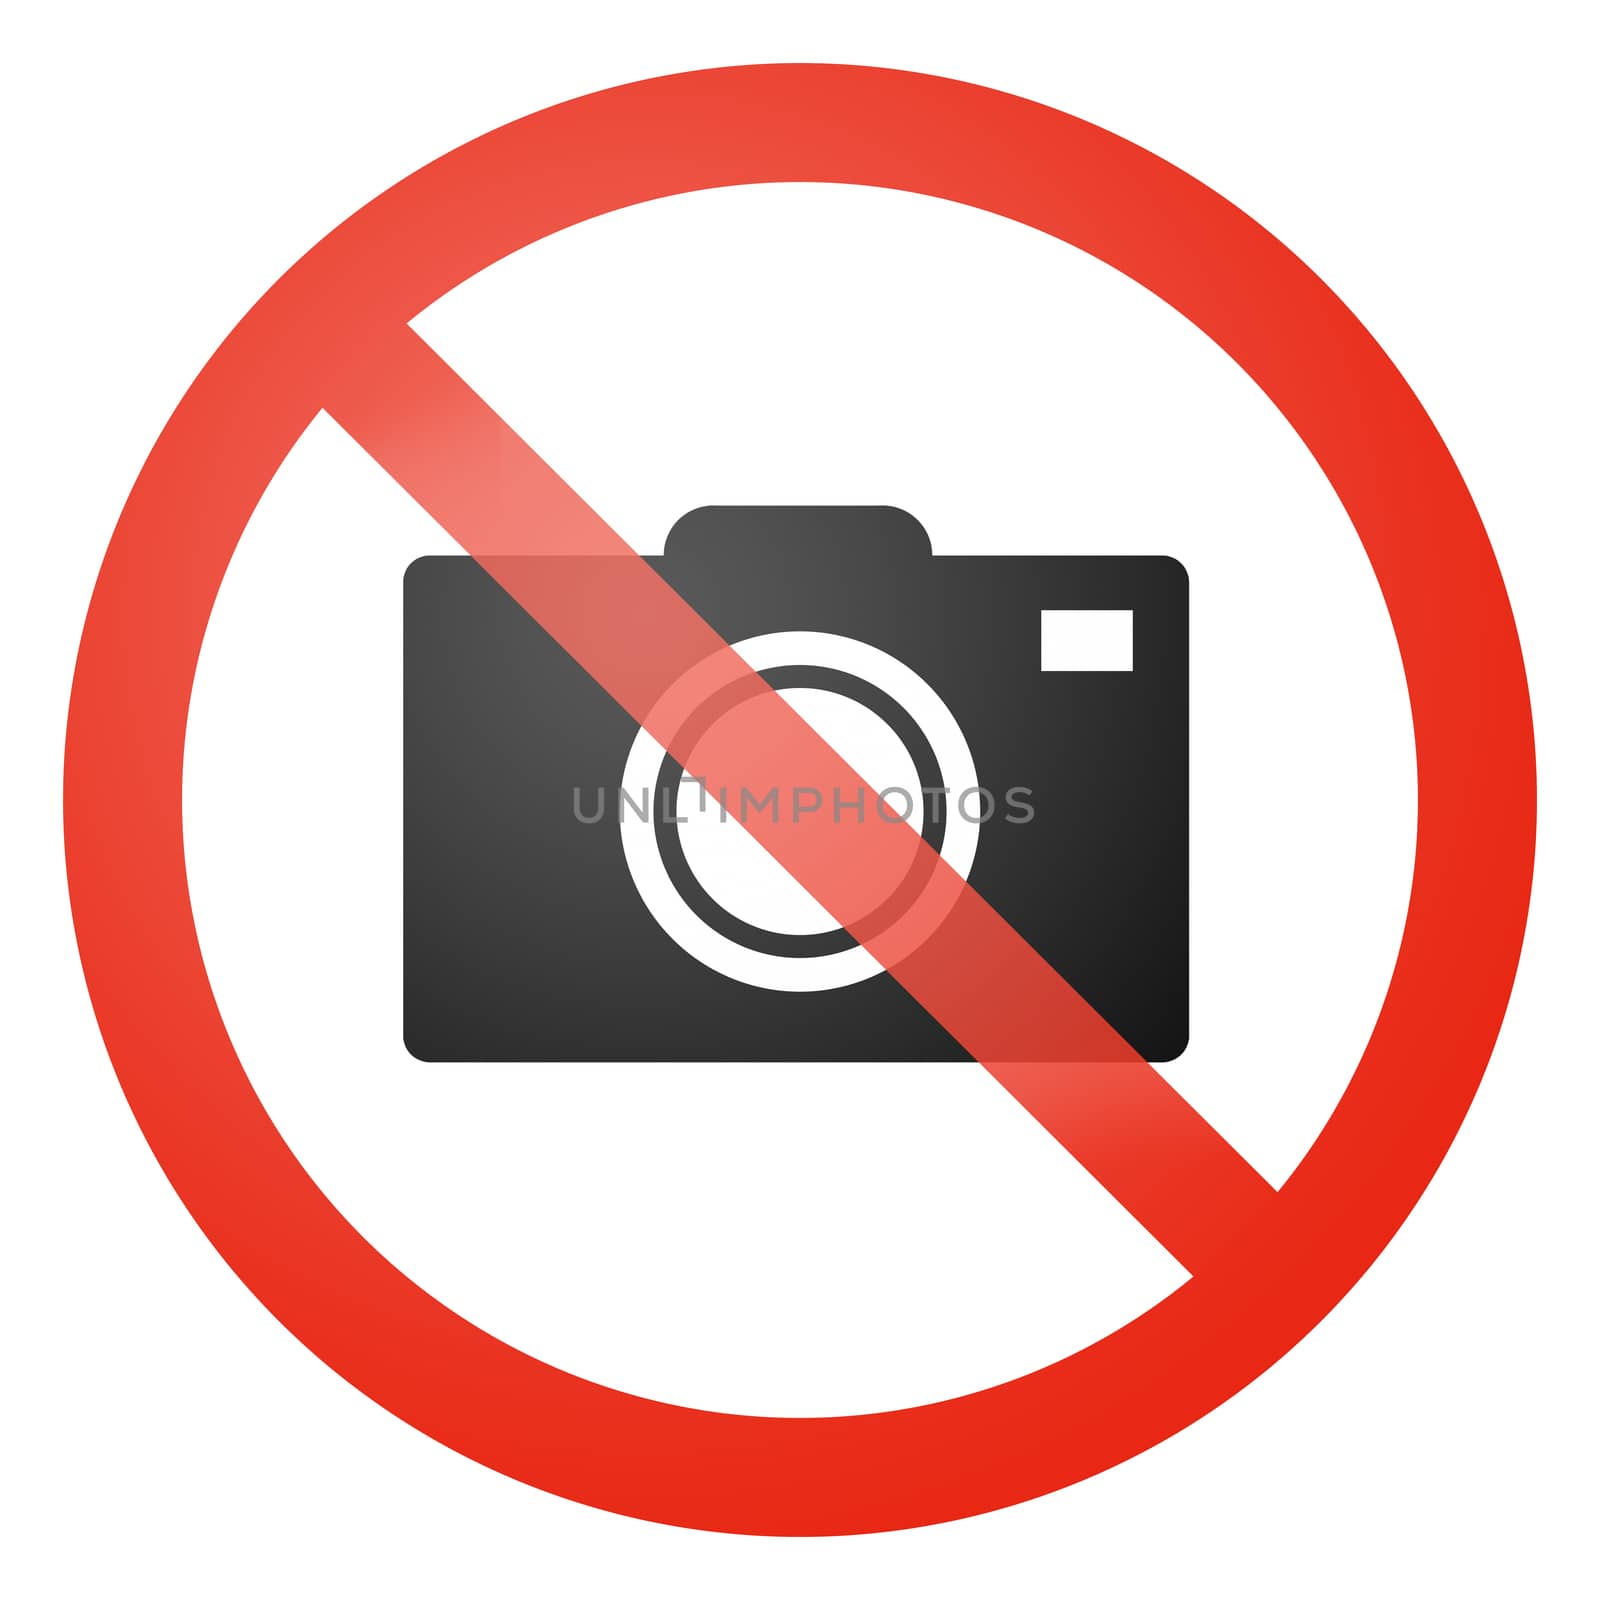 Photo not allowed sign - white background